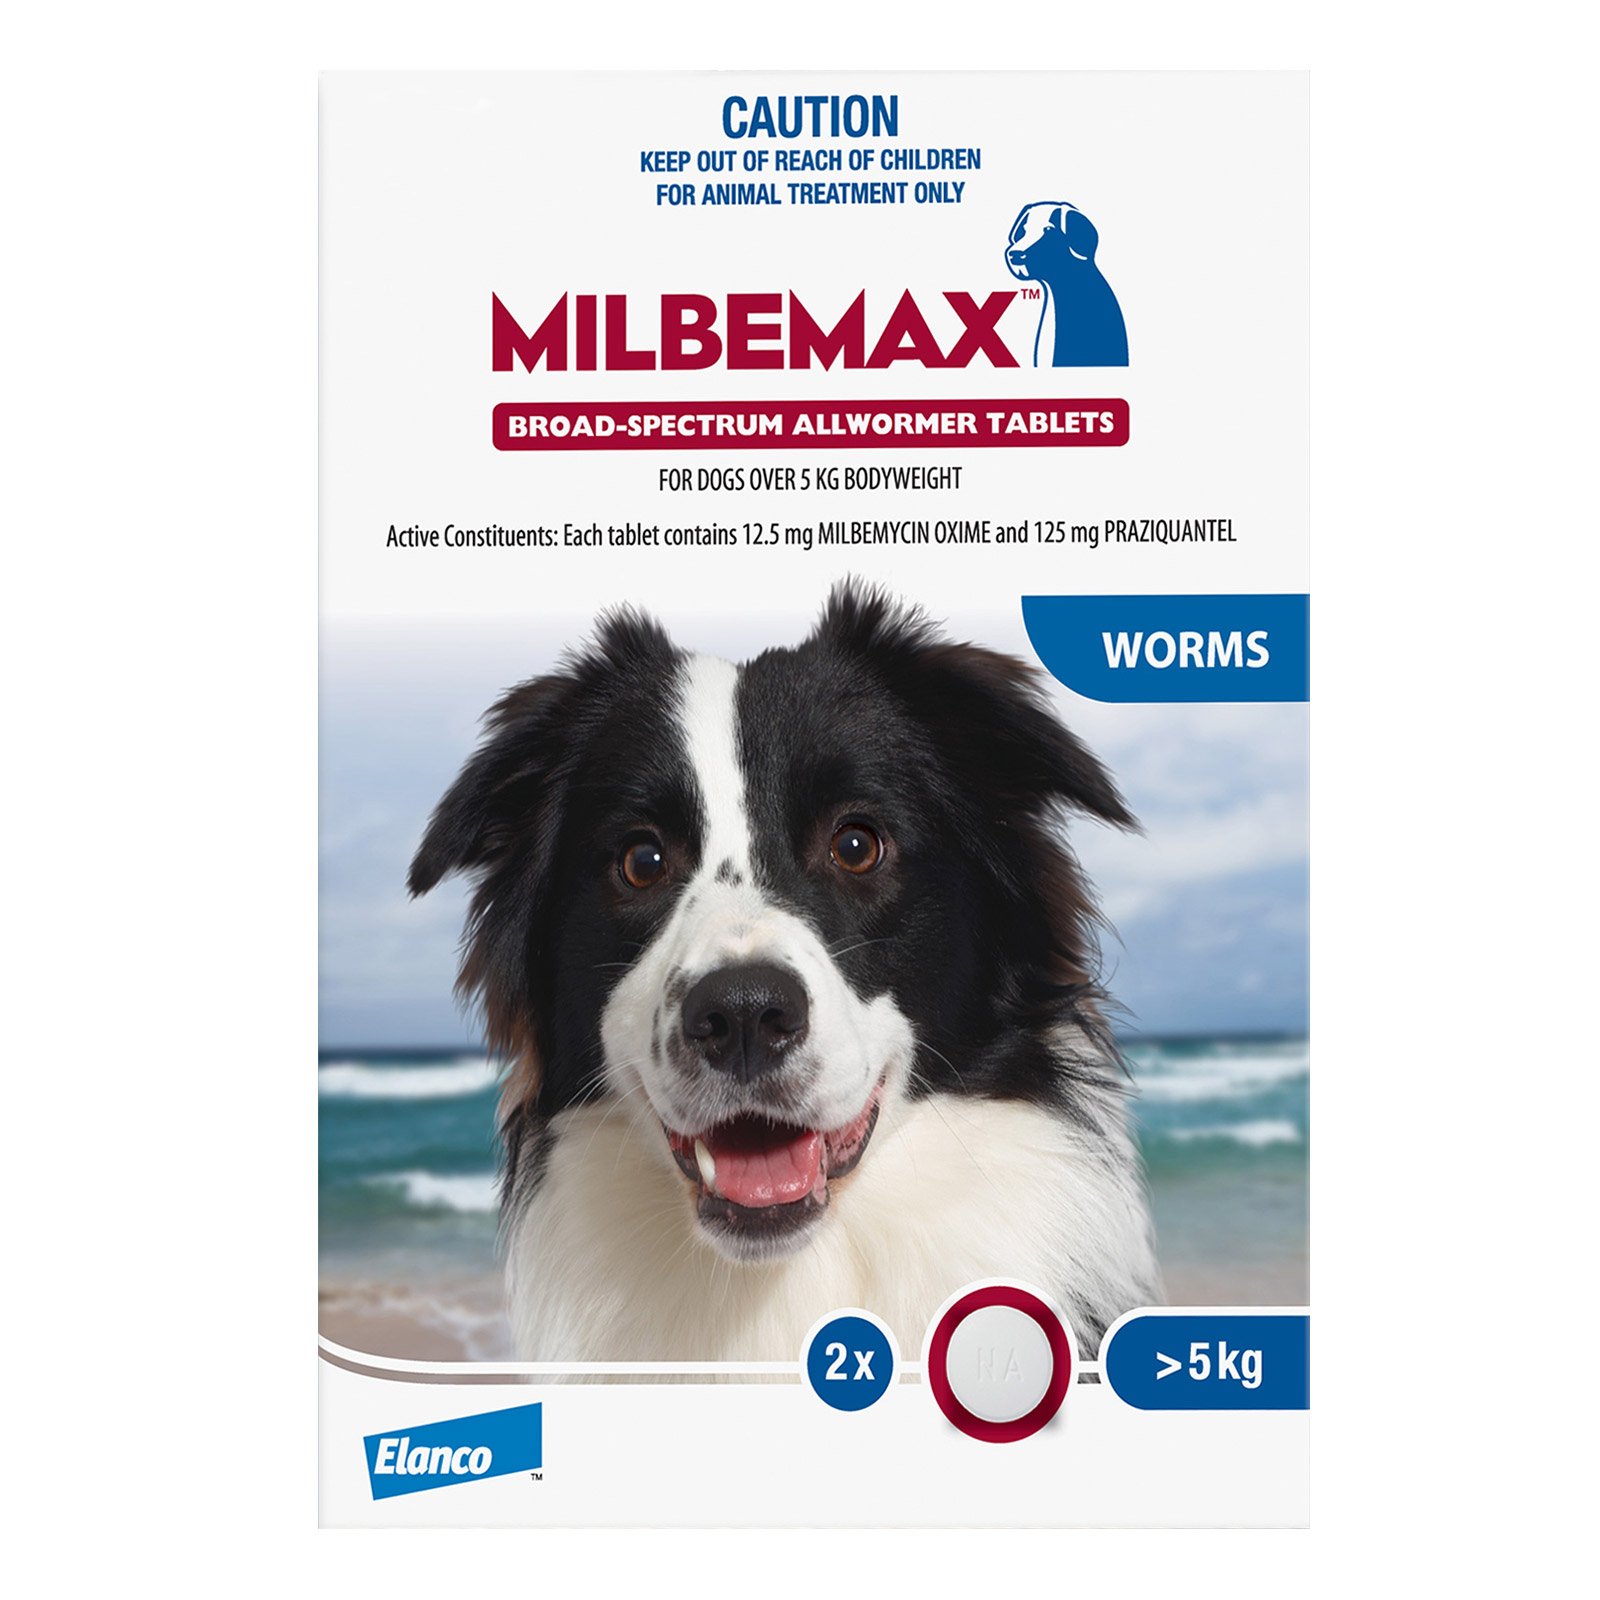 Milbemax Allwormer Tablets For Large Dogs 5 To 25 Kg